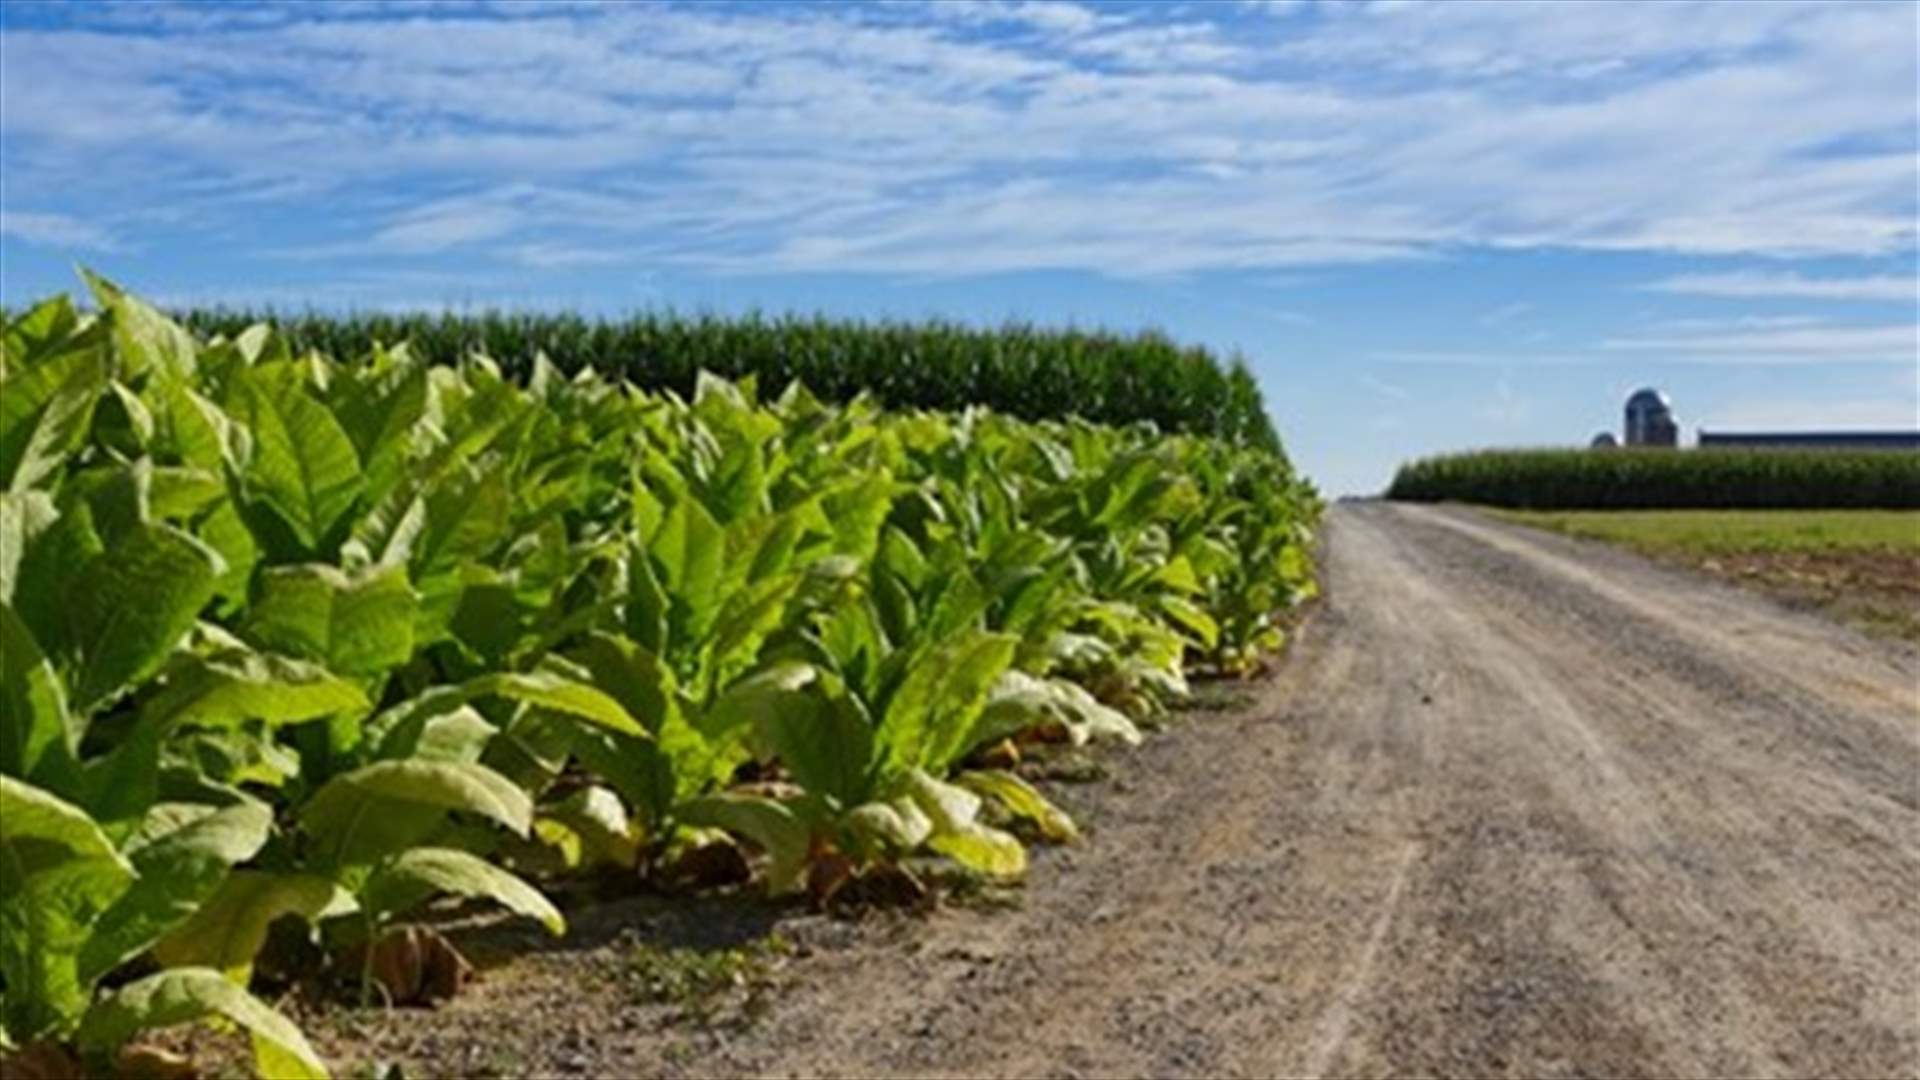 Lebanon’s tobacco plantation: A thriving role model for other sectors